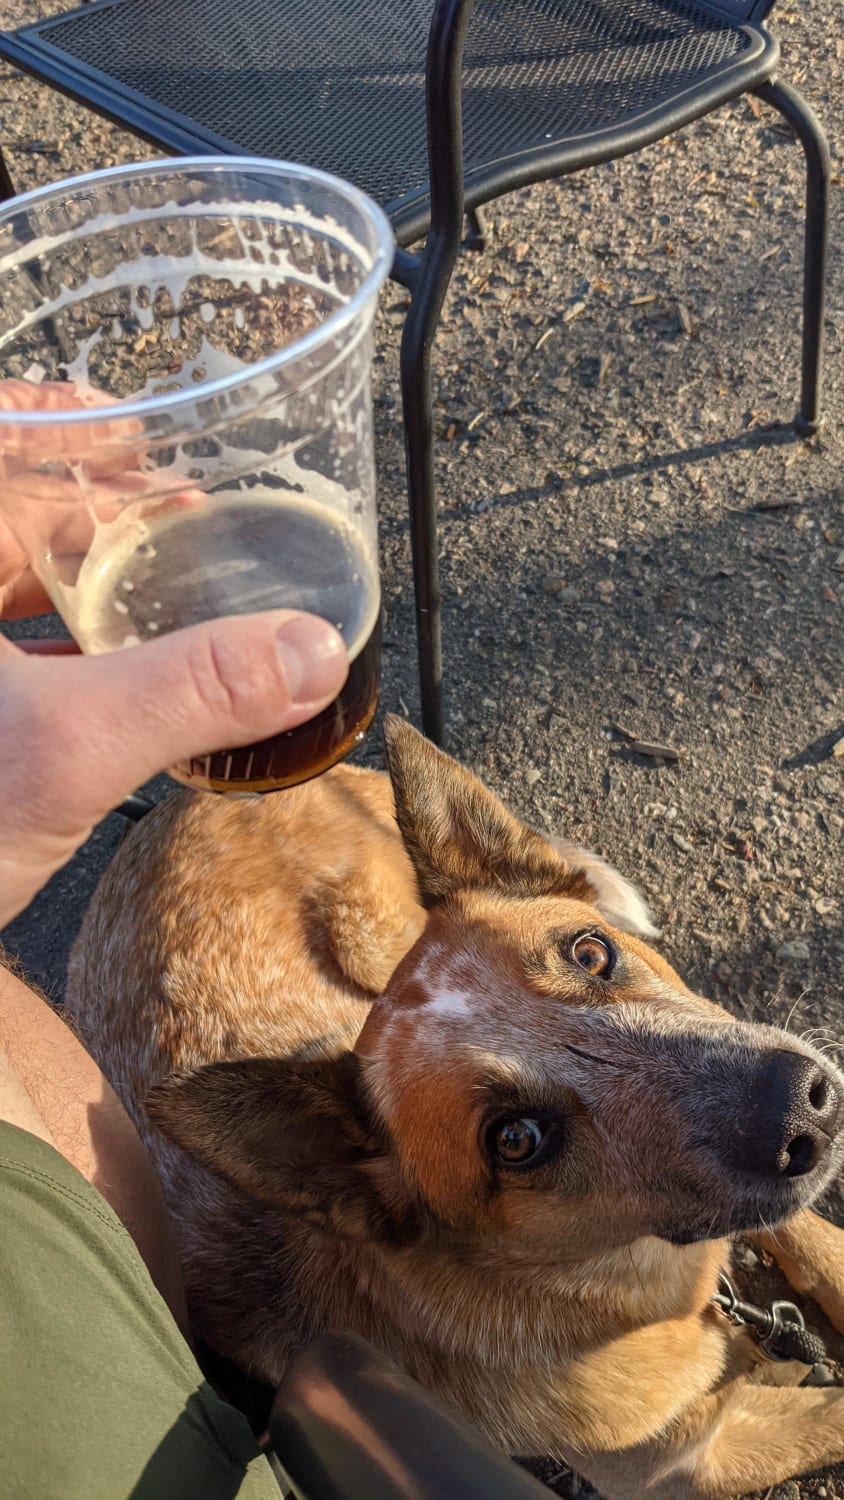 I got to this brewery a little late on a Sunday, not having seen their post that they closed early for the day. I got my stuff on the patio, with my dog and tried walking inside. One of the workers on the patio said they were closed, but then offered me his second beer. What a bro.